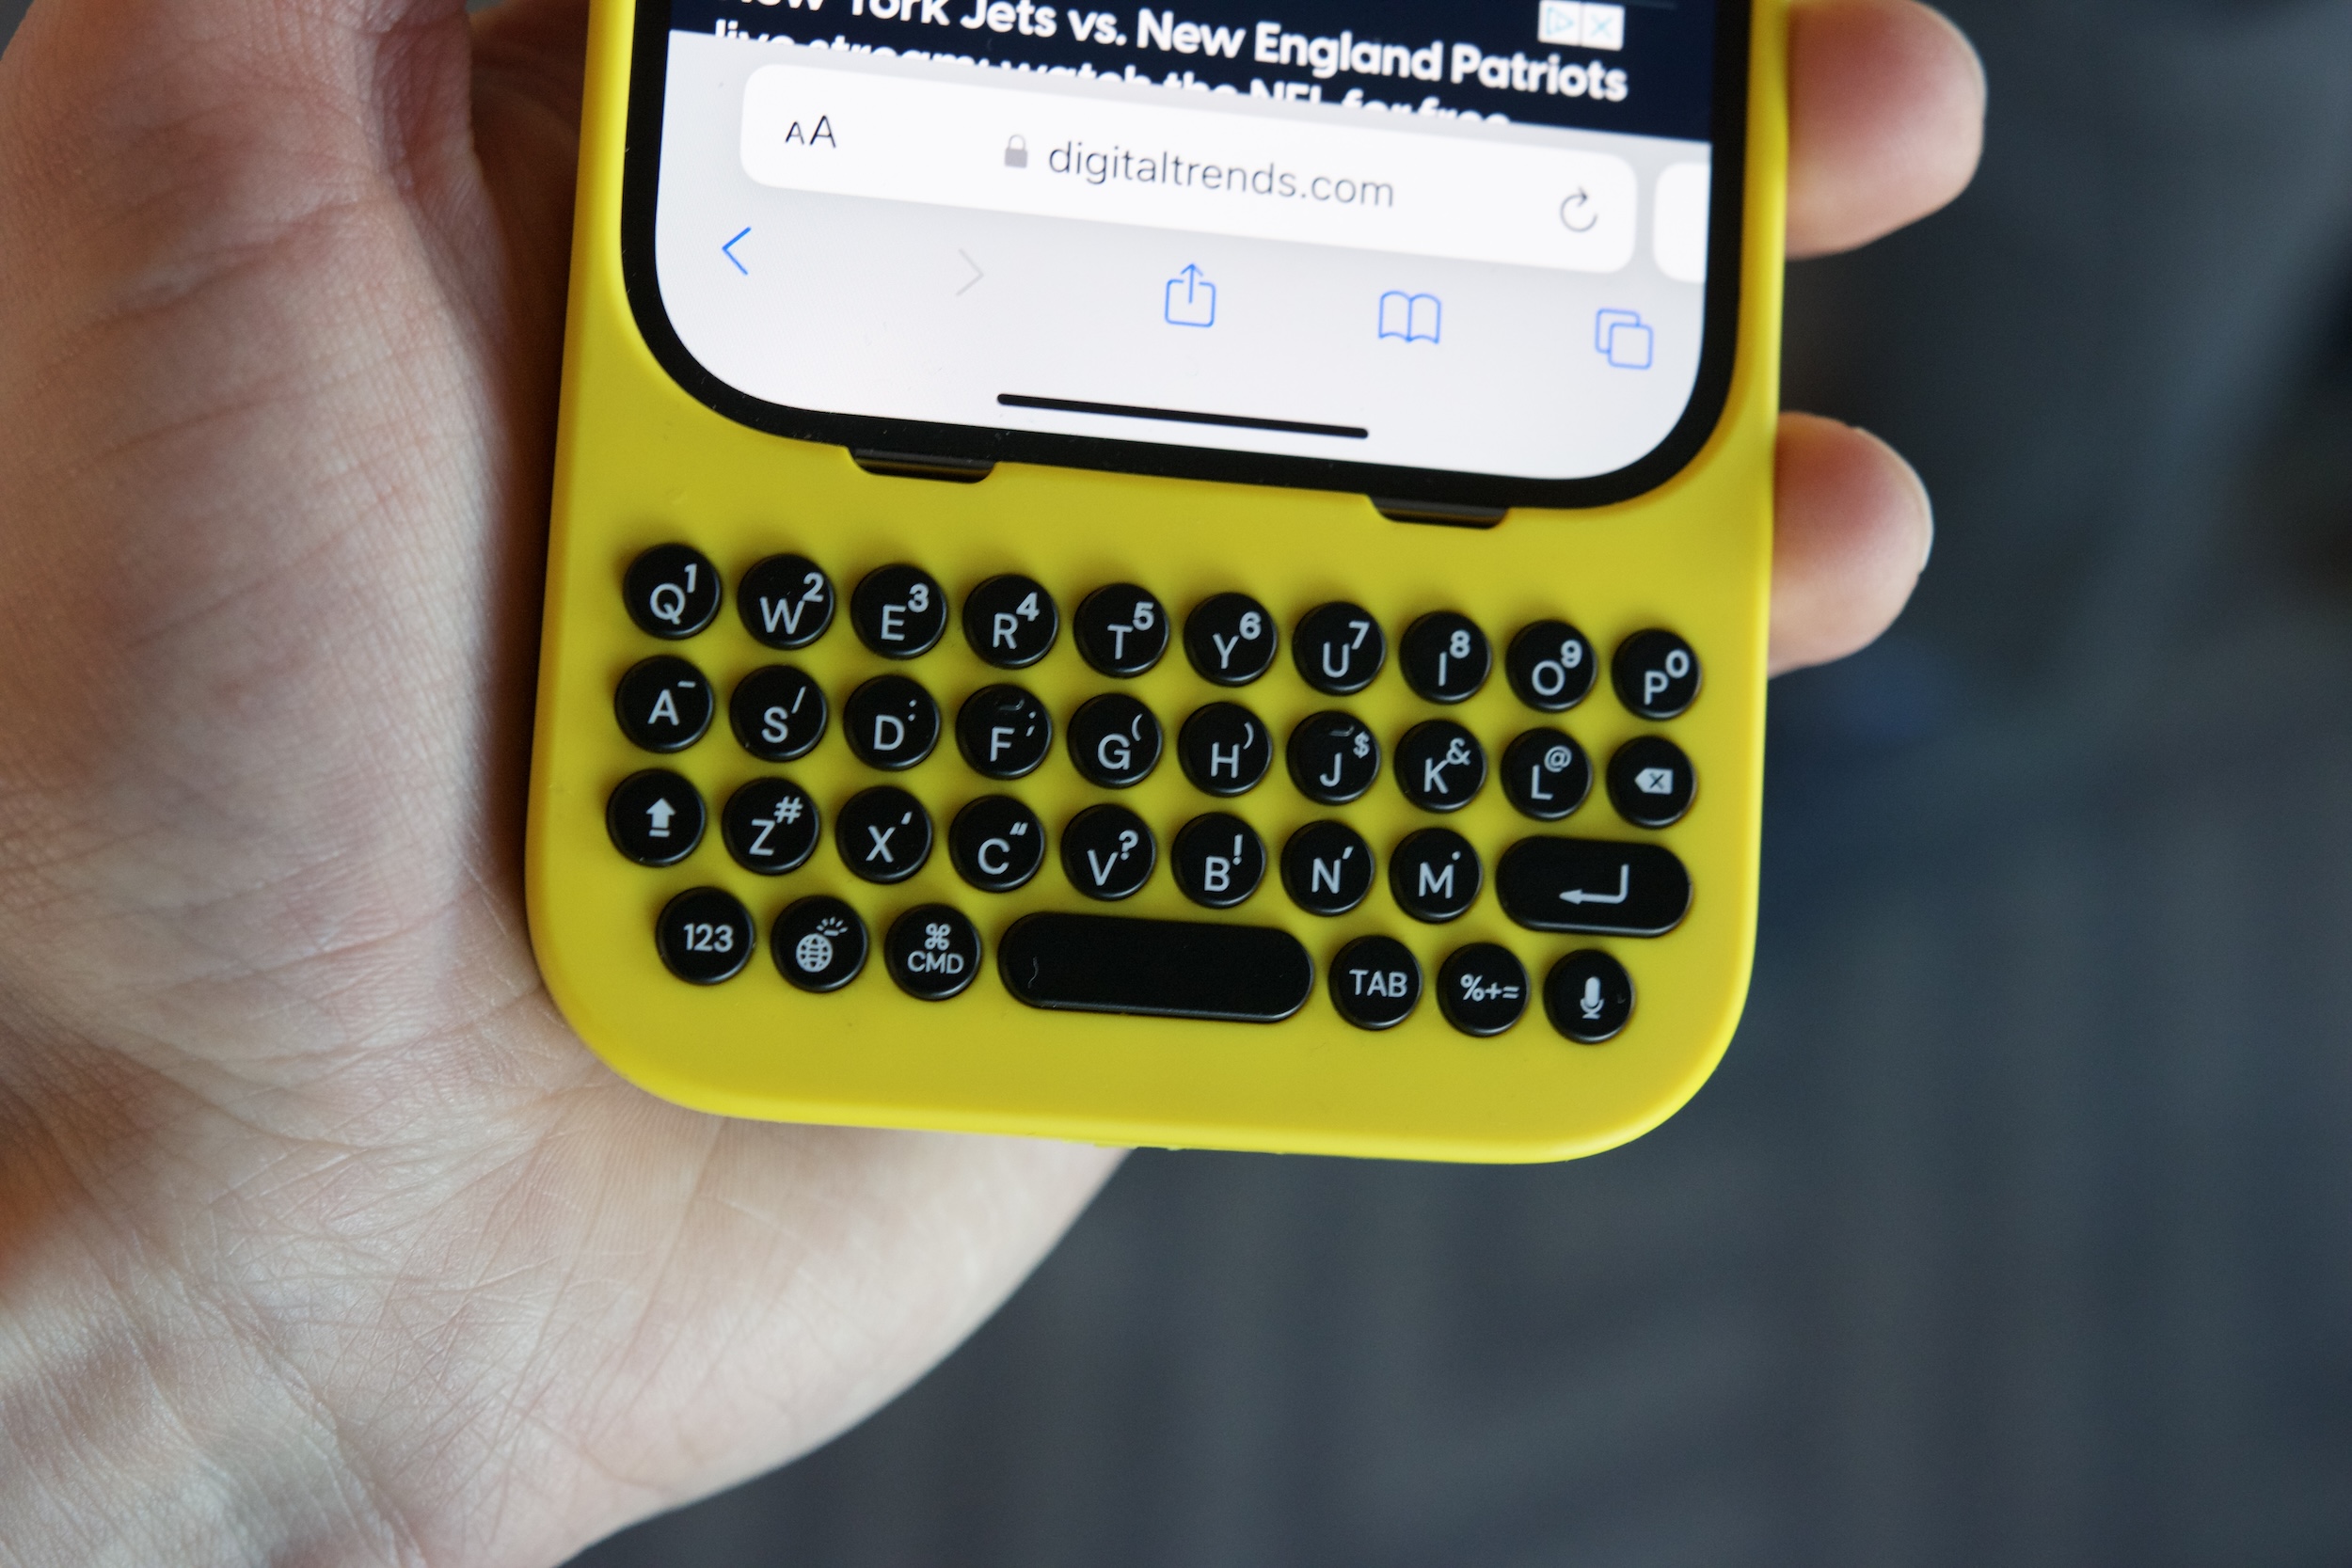 The keyboard on a yellow Clicks keyboard case.